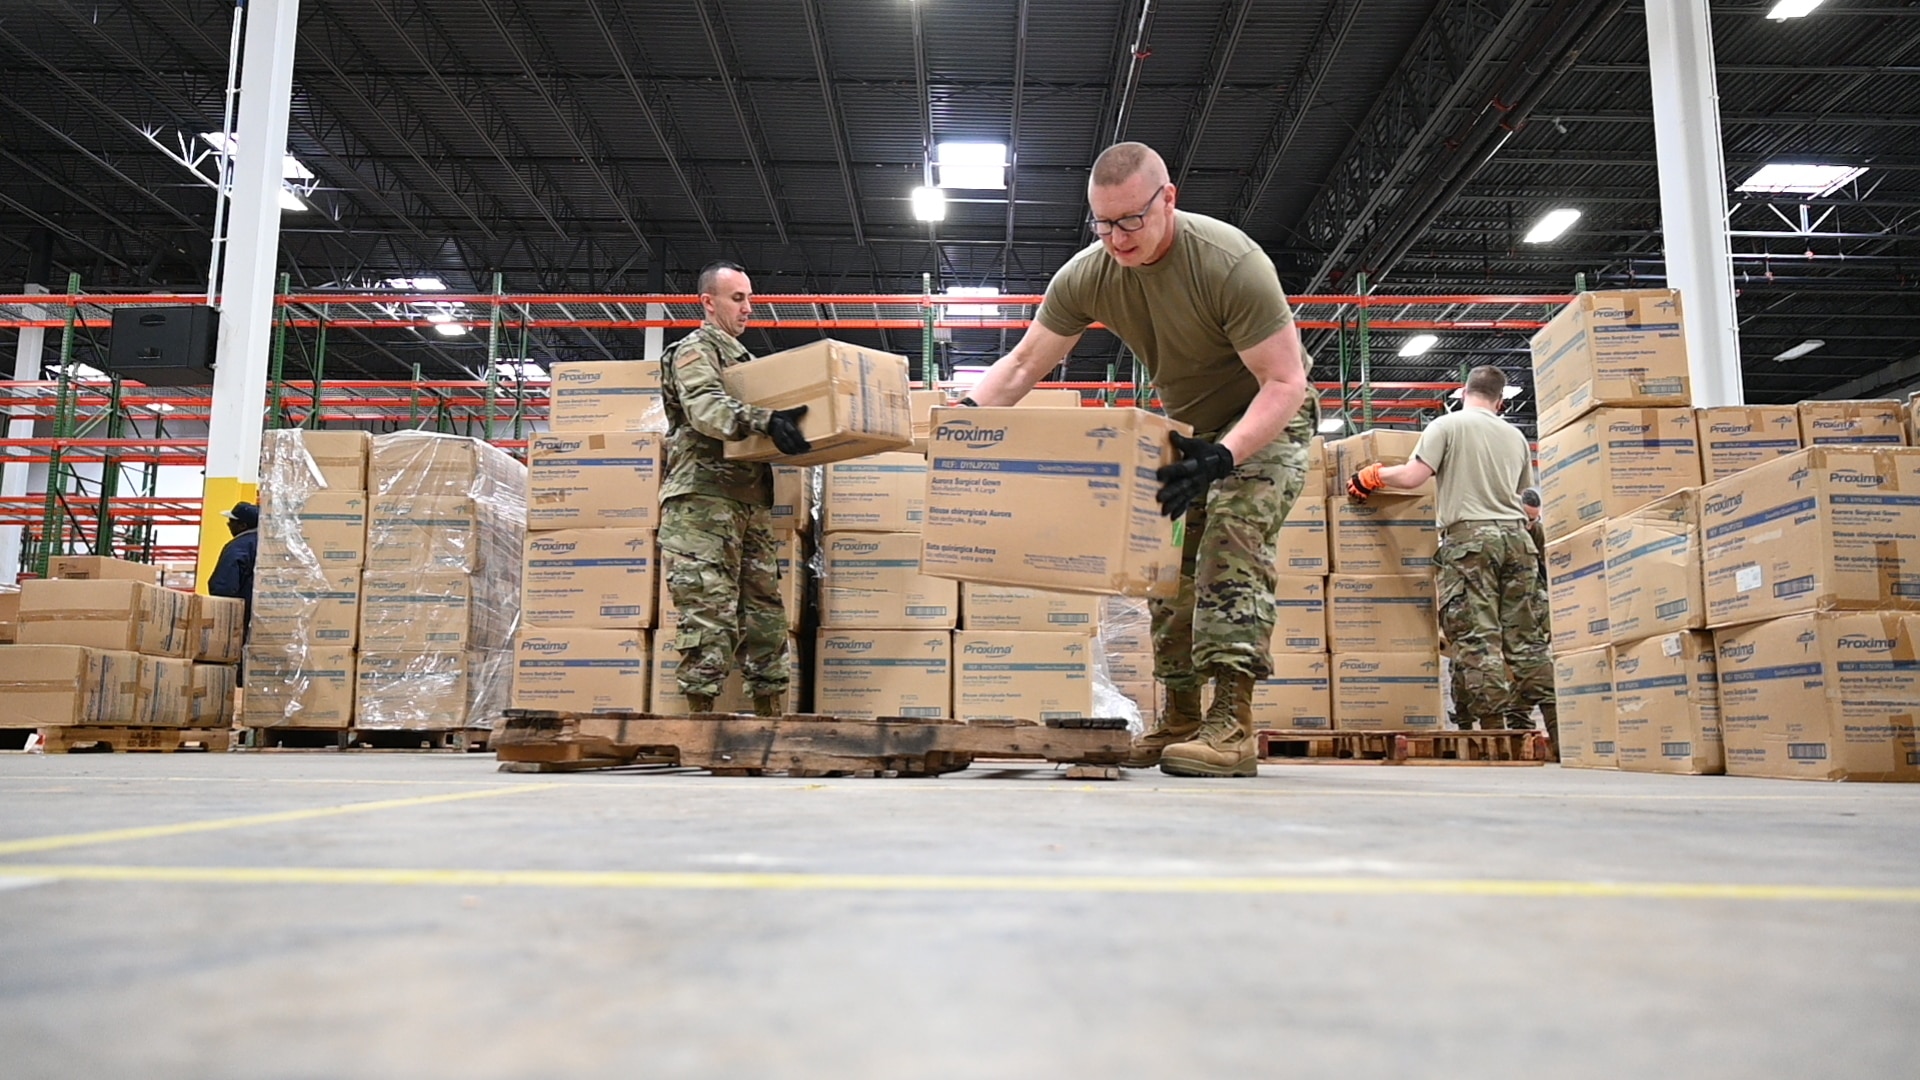 U.S. Air Force Tech. Sgt. Bradly Tuthill, left, and U.S. Air Force Master Sgt. Richard Malloy, ground transportation specialists with the 175th Logistics Readiness Squadron, Maryland Air National Guard, prepare and load boxes of medical supplies and equipment March 19, 2020, at the Maryland Strategic National Stockpile. The Maryland Guard has shipped more than 1 million items to health care workers and hospitals across the state.